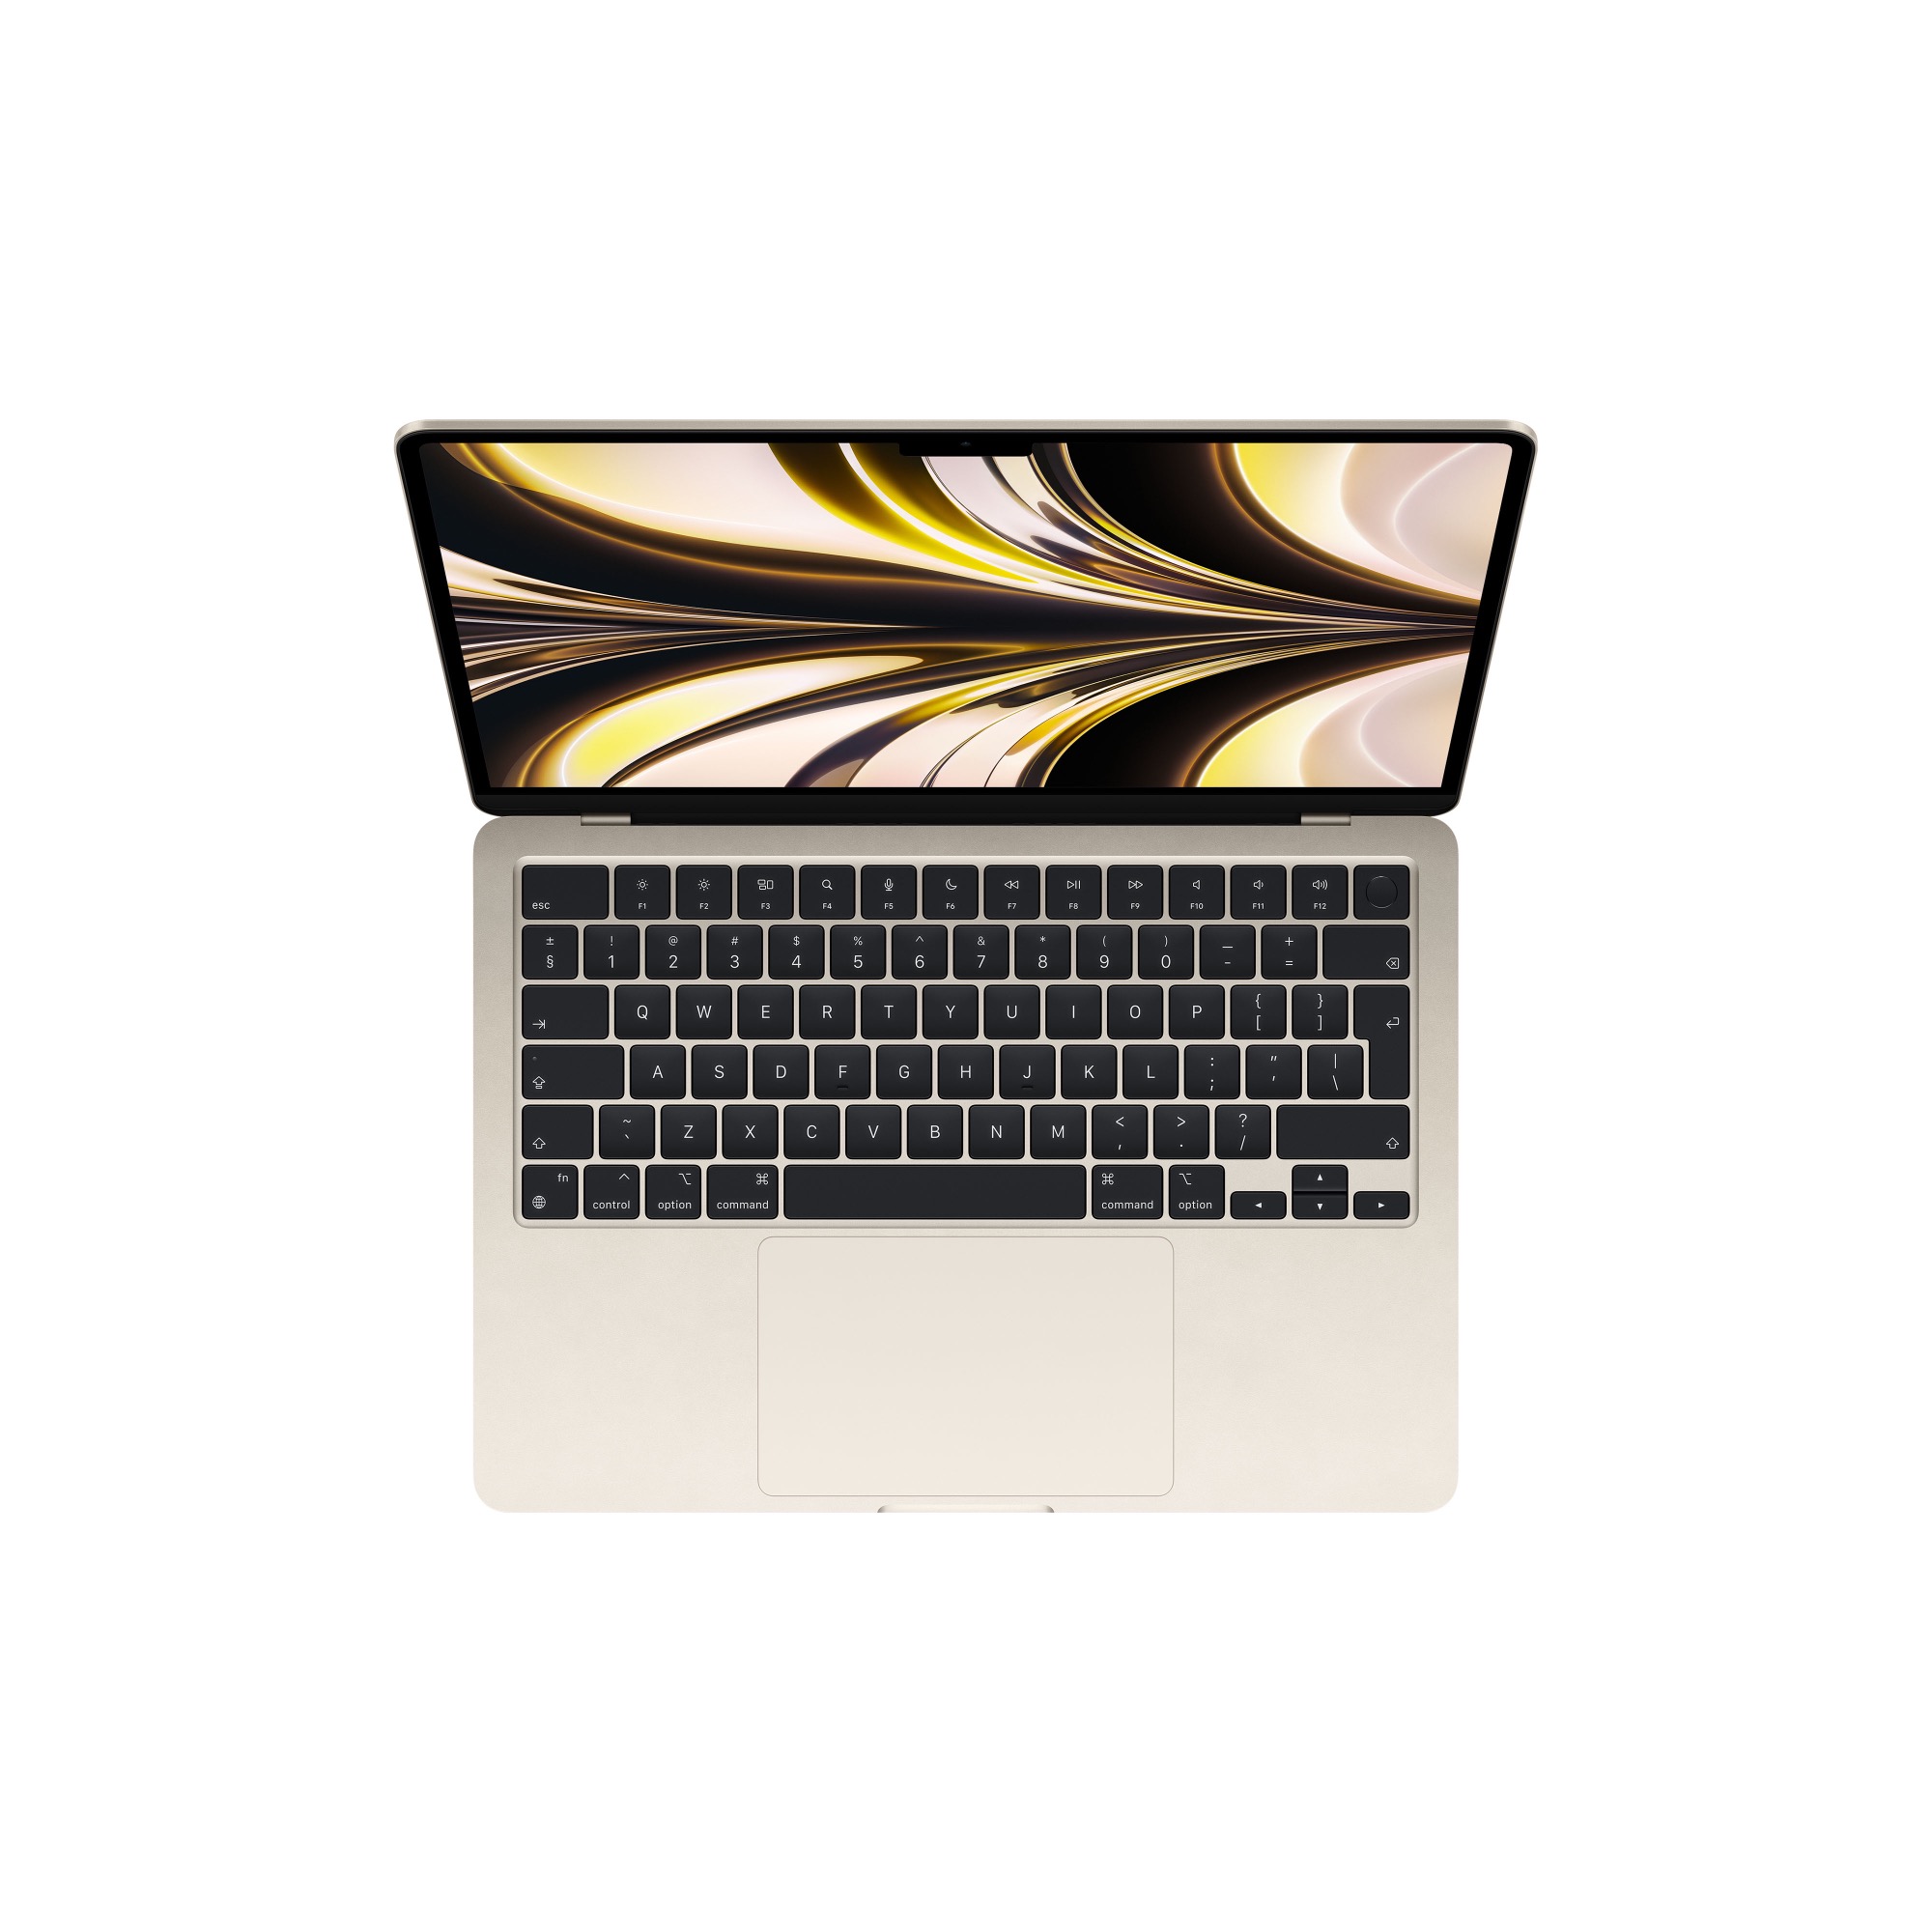 APPLE 13-inch MacBook Air: Apple M2 chip with 8-core CPU and 10-core GPU, 512GB - Starlight